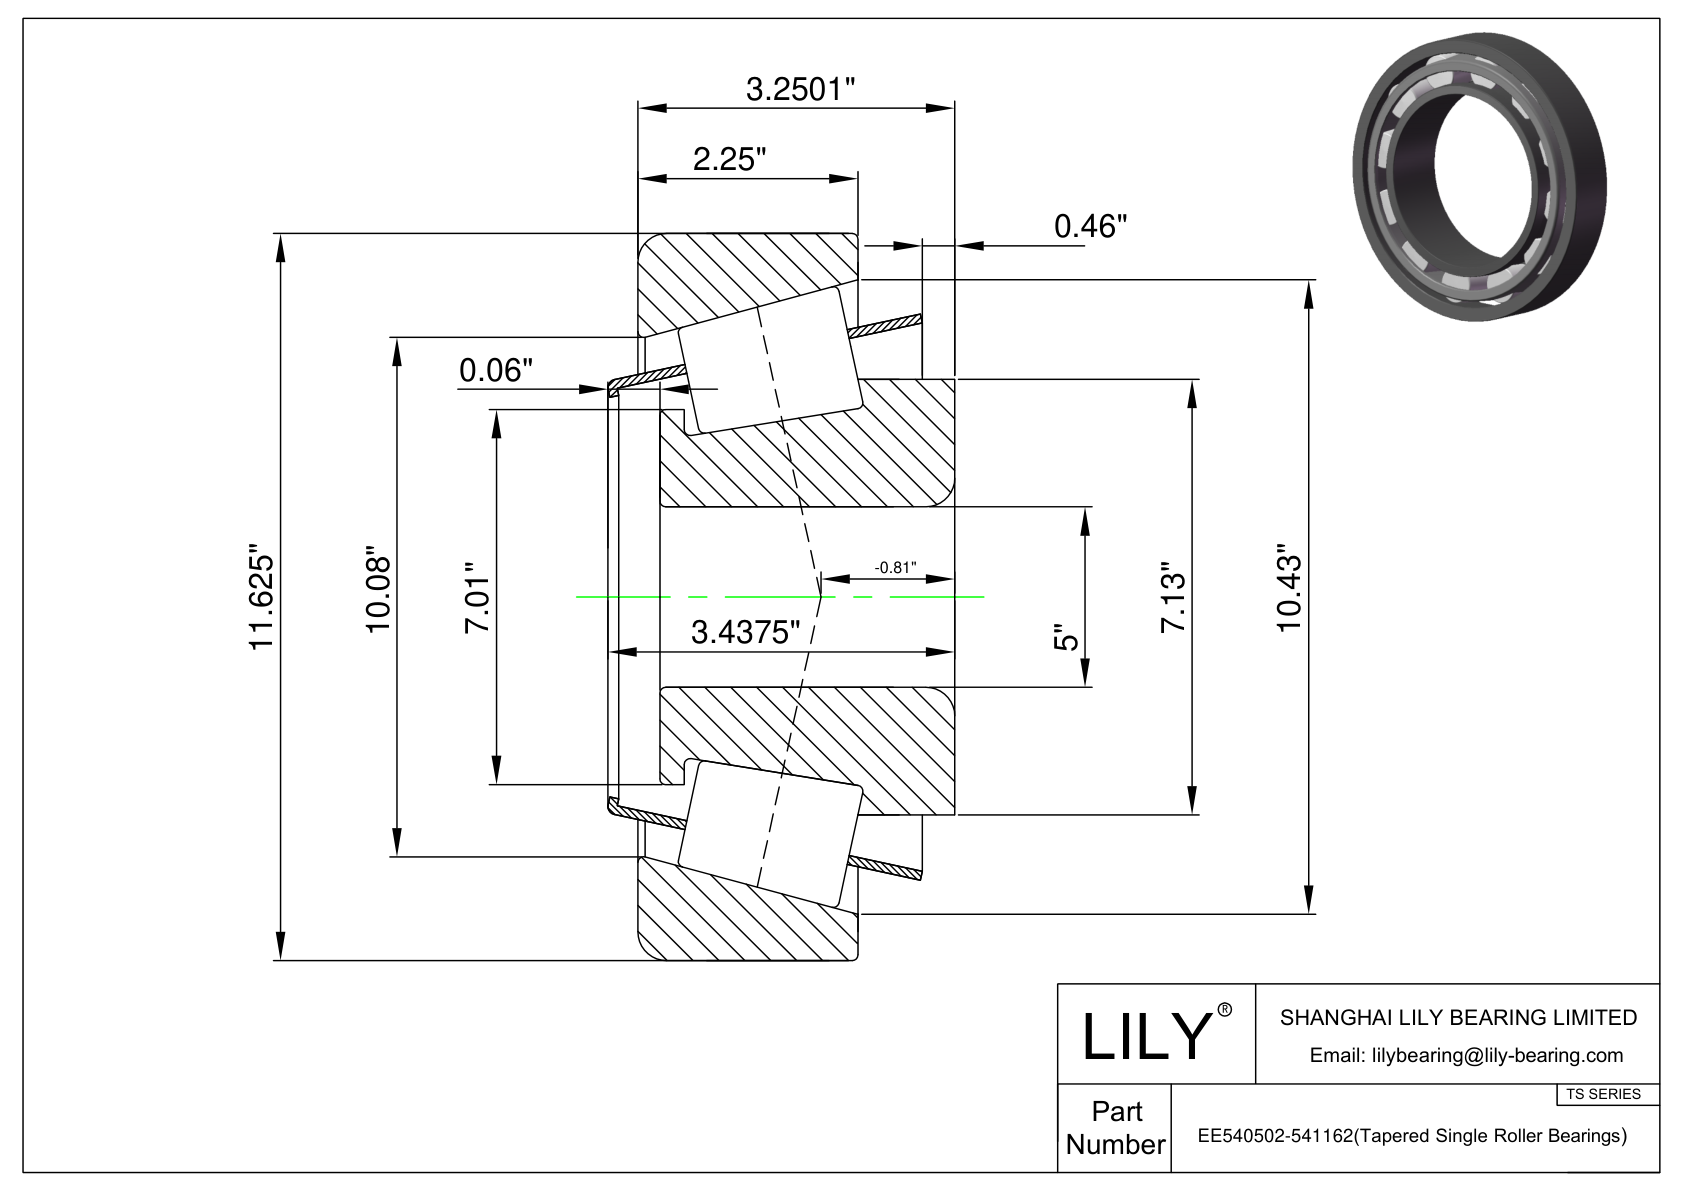 EE540502-541162 TS (Tapered Single Roller Bearings) (Imperial) cad drawing